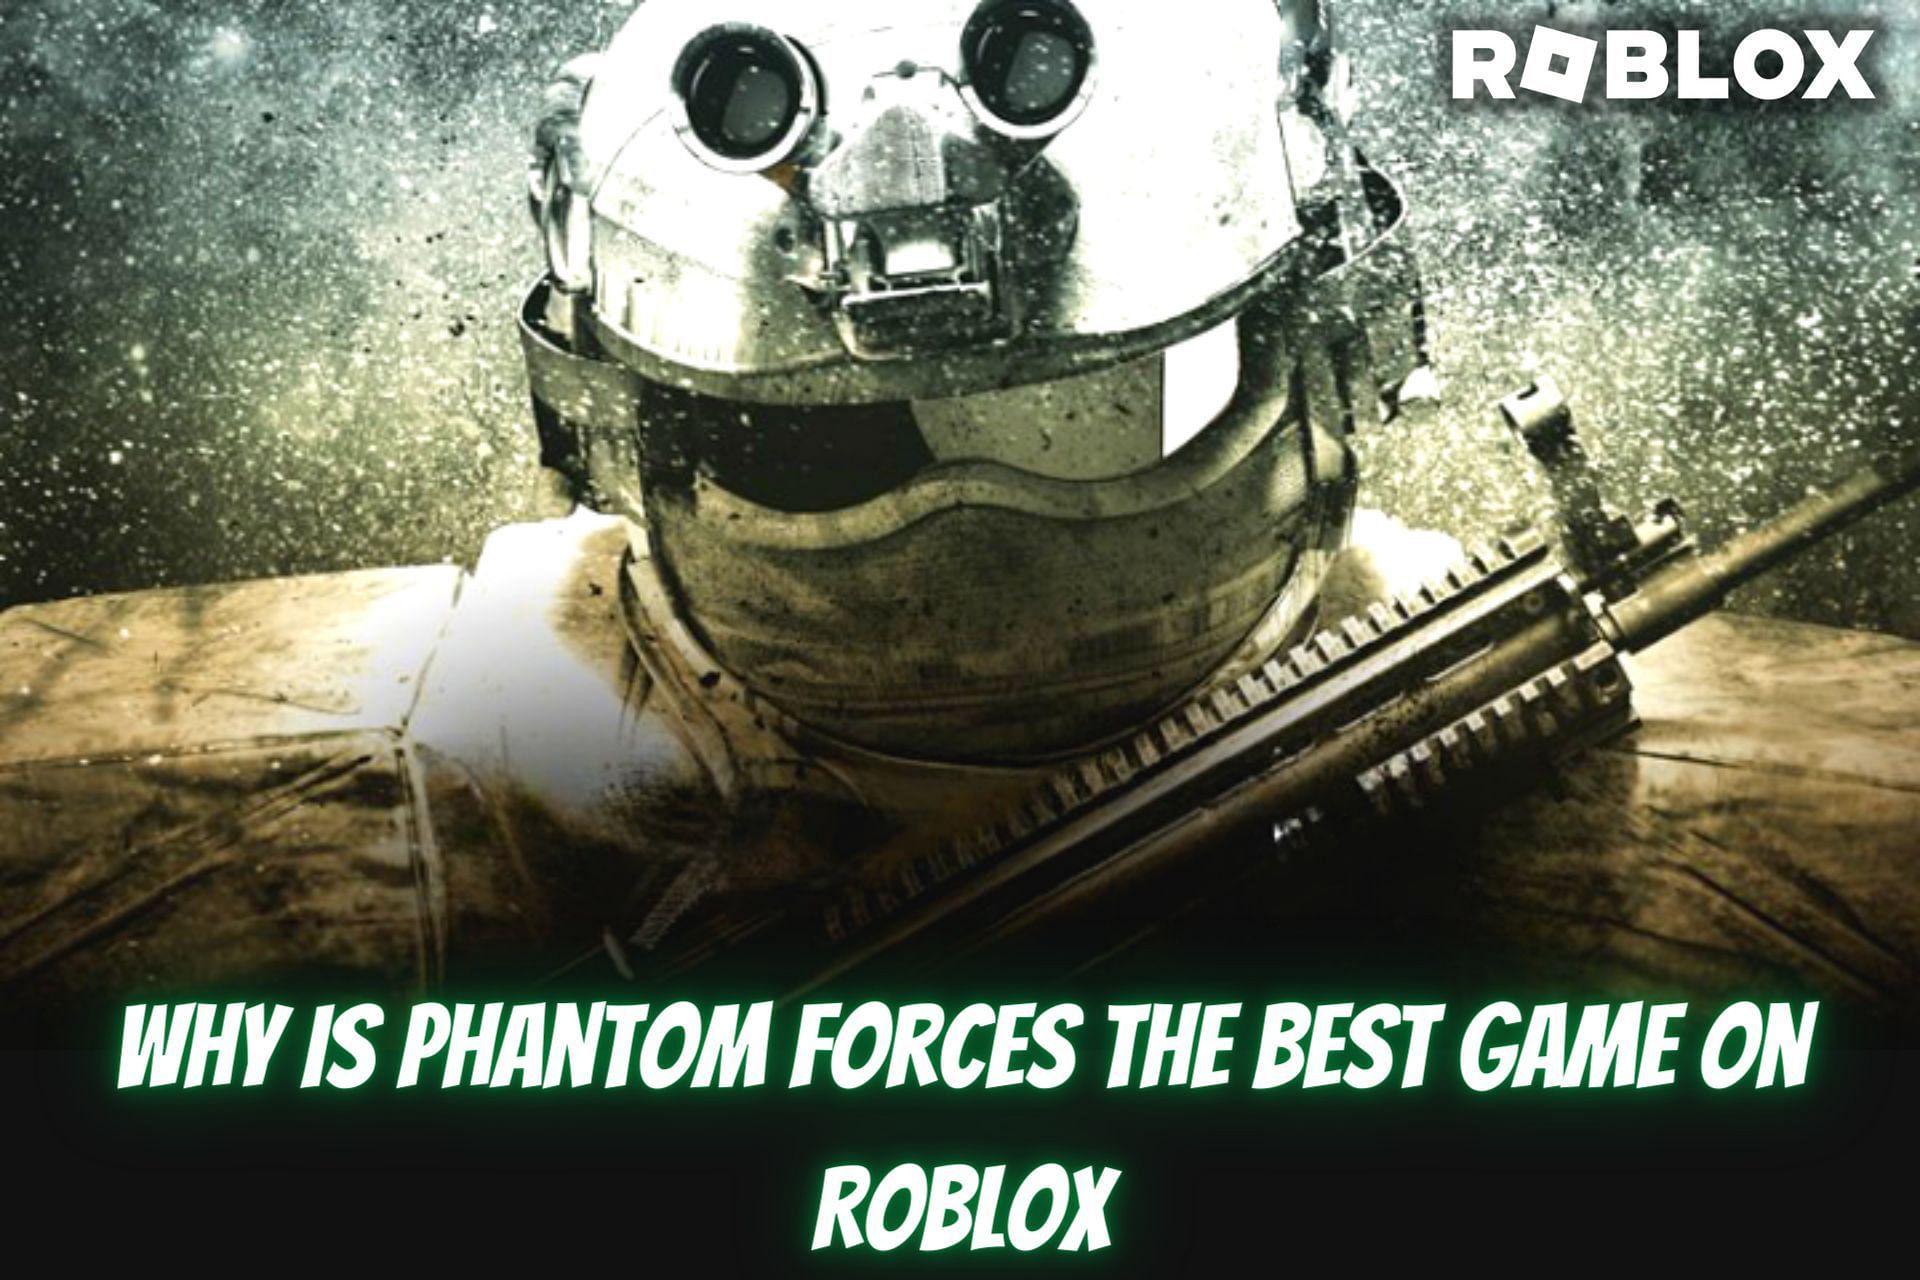 Reasons why Phantom Forces is the best game (Image via Roblox)